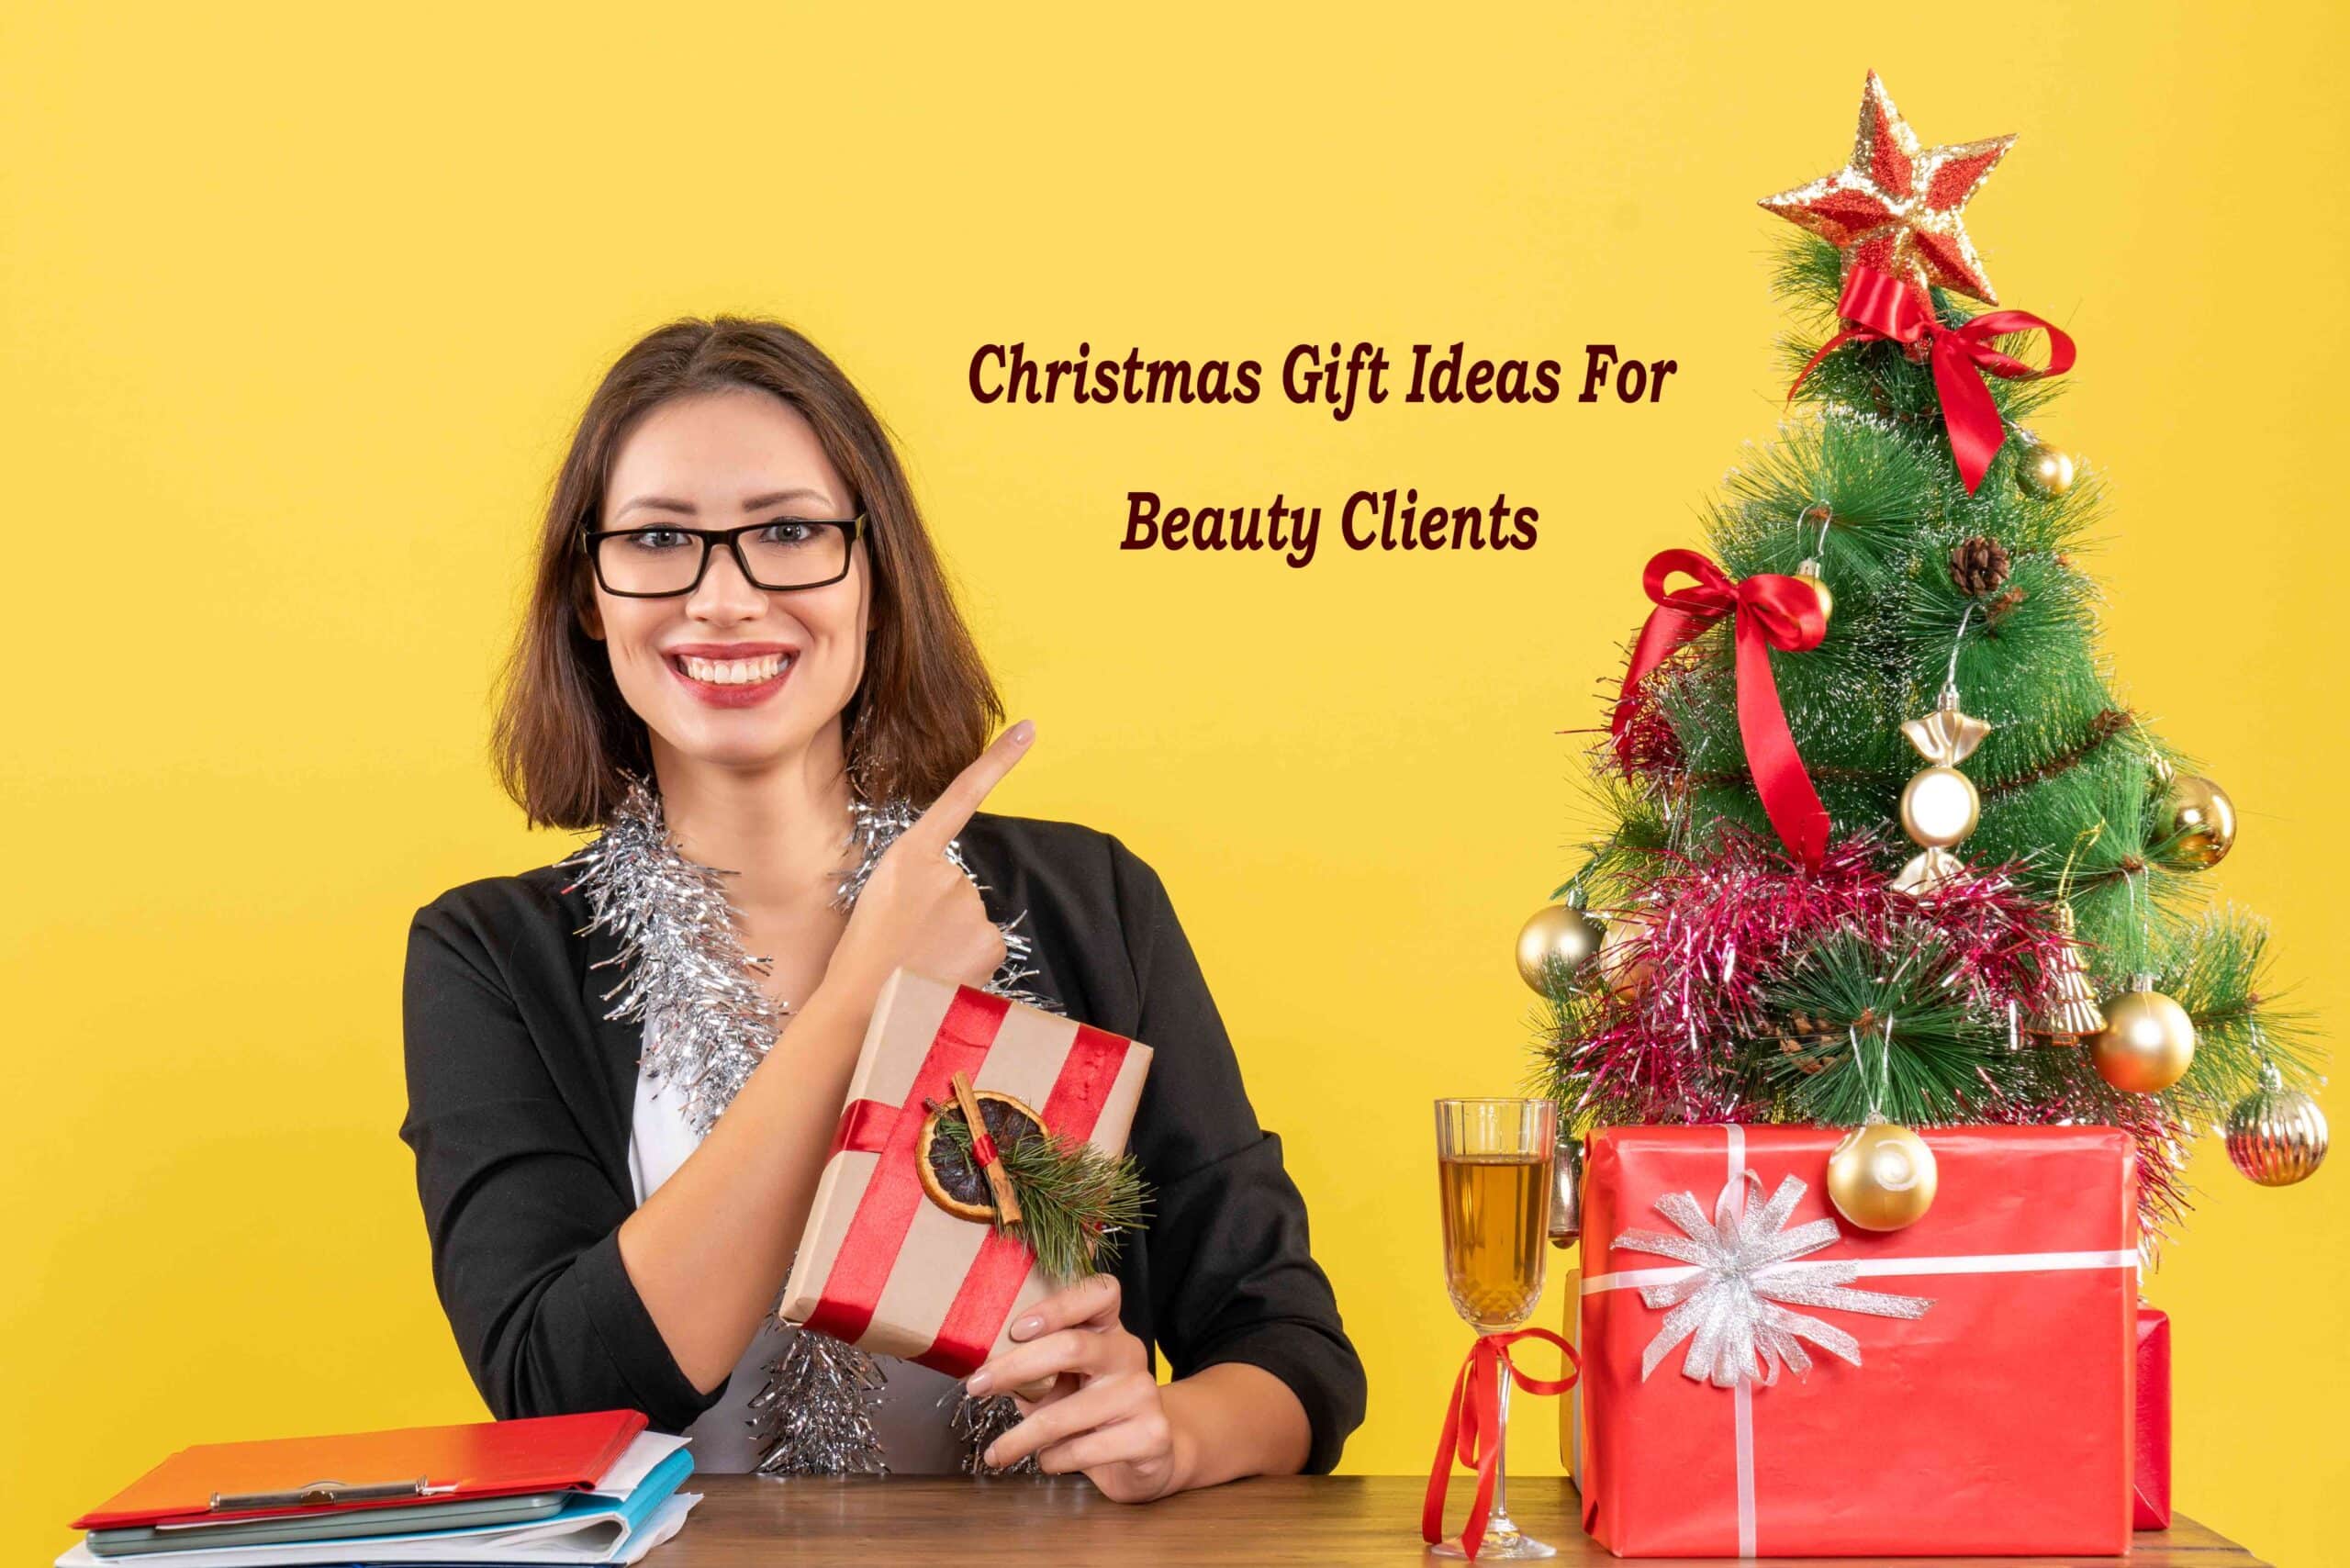 Christmas Gift Ideas for Beauty Clients